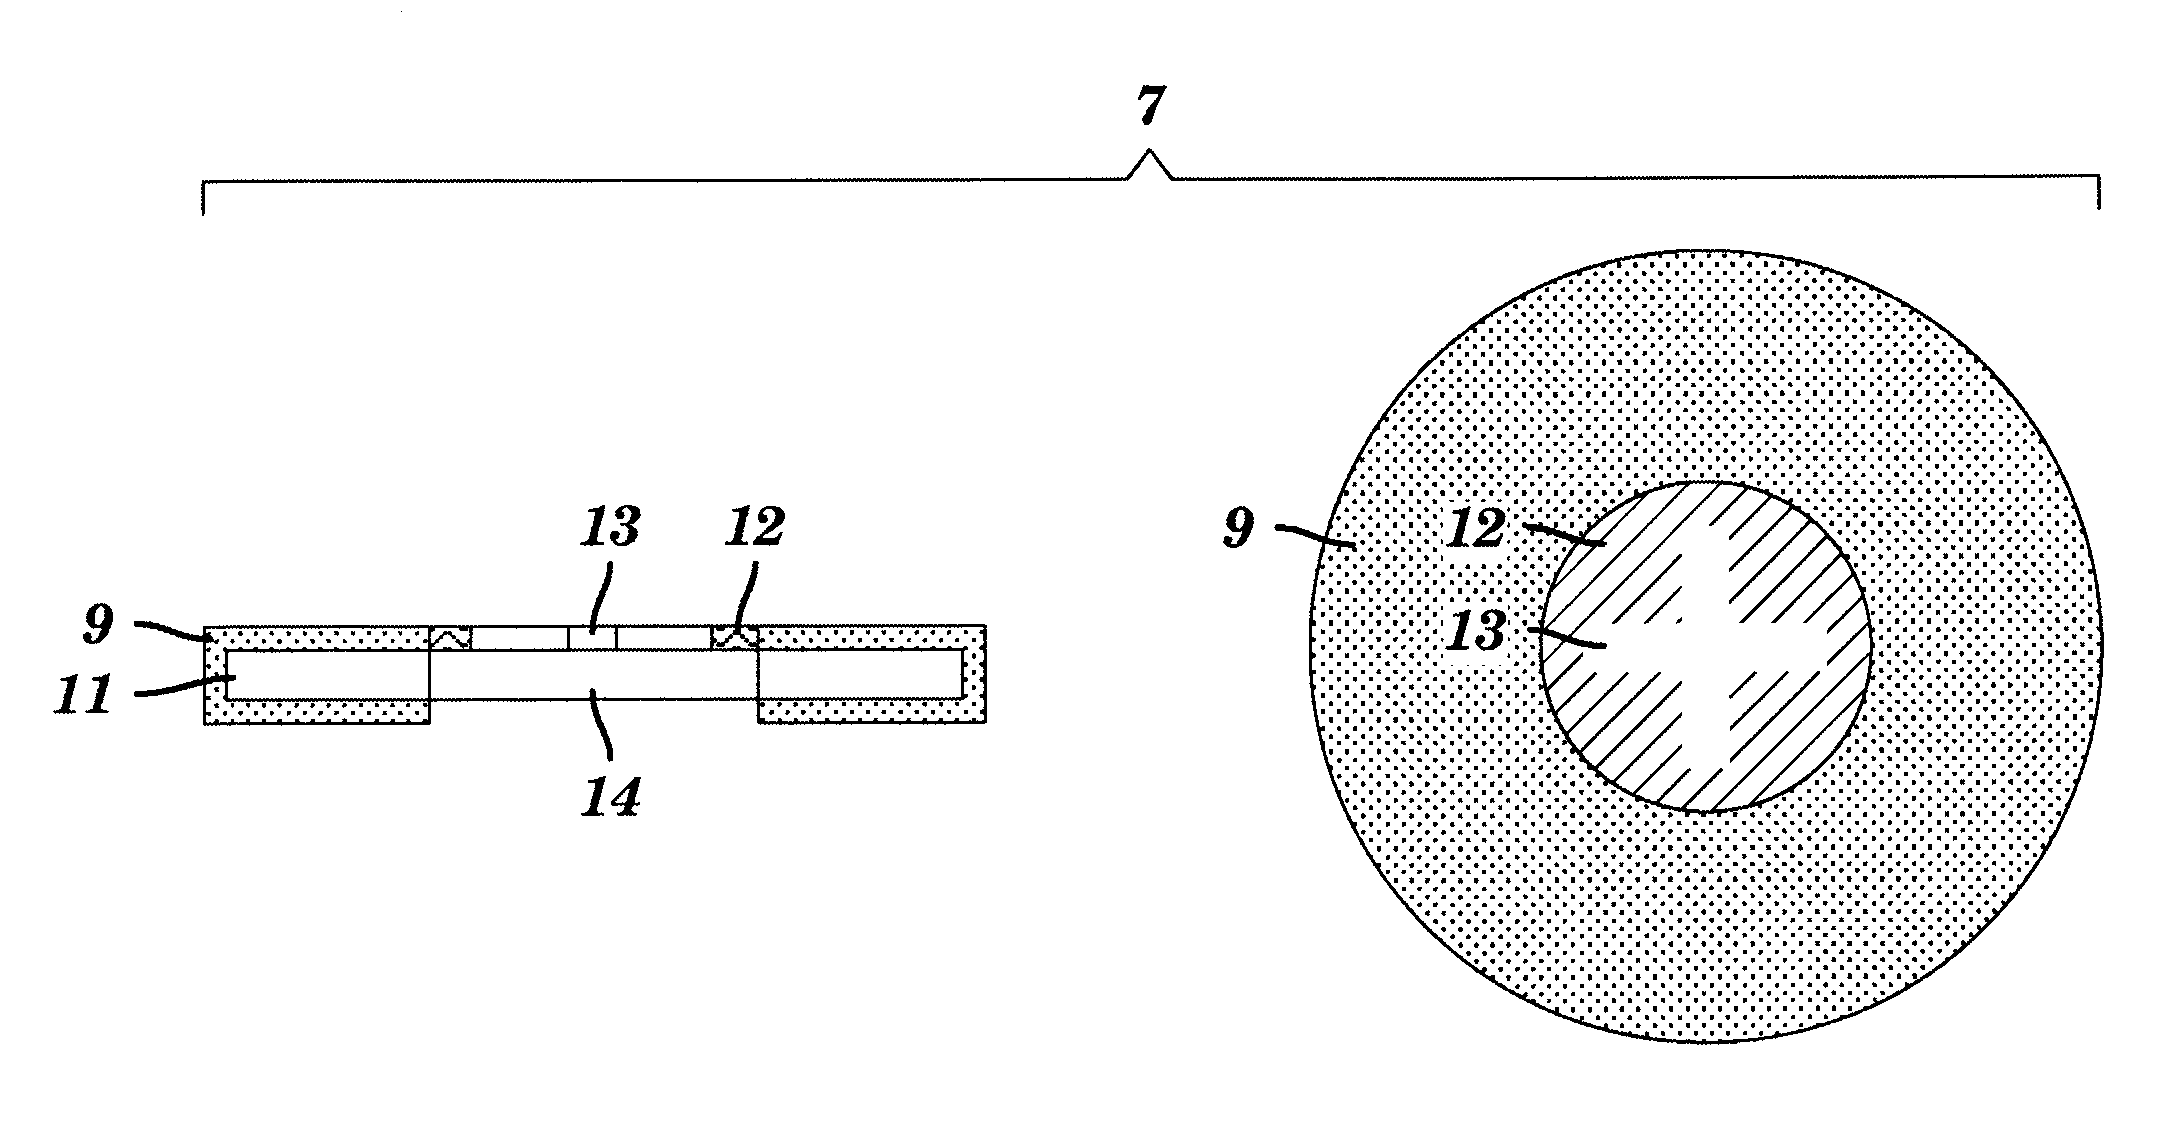 Method to reduce mechanical wear of immersion lithography apparatus